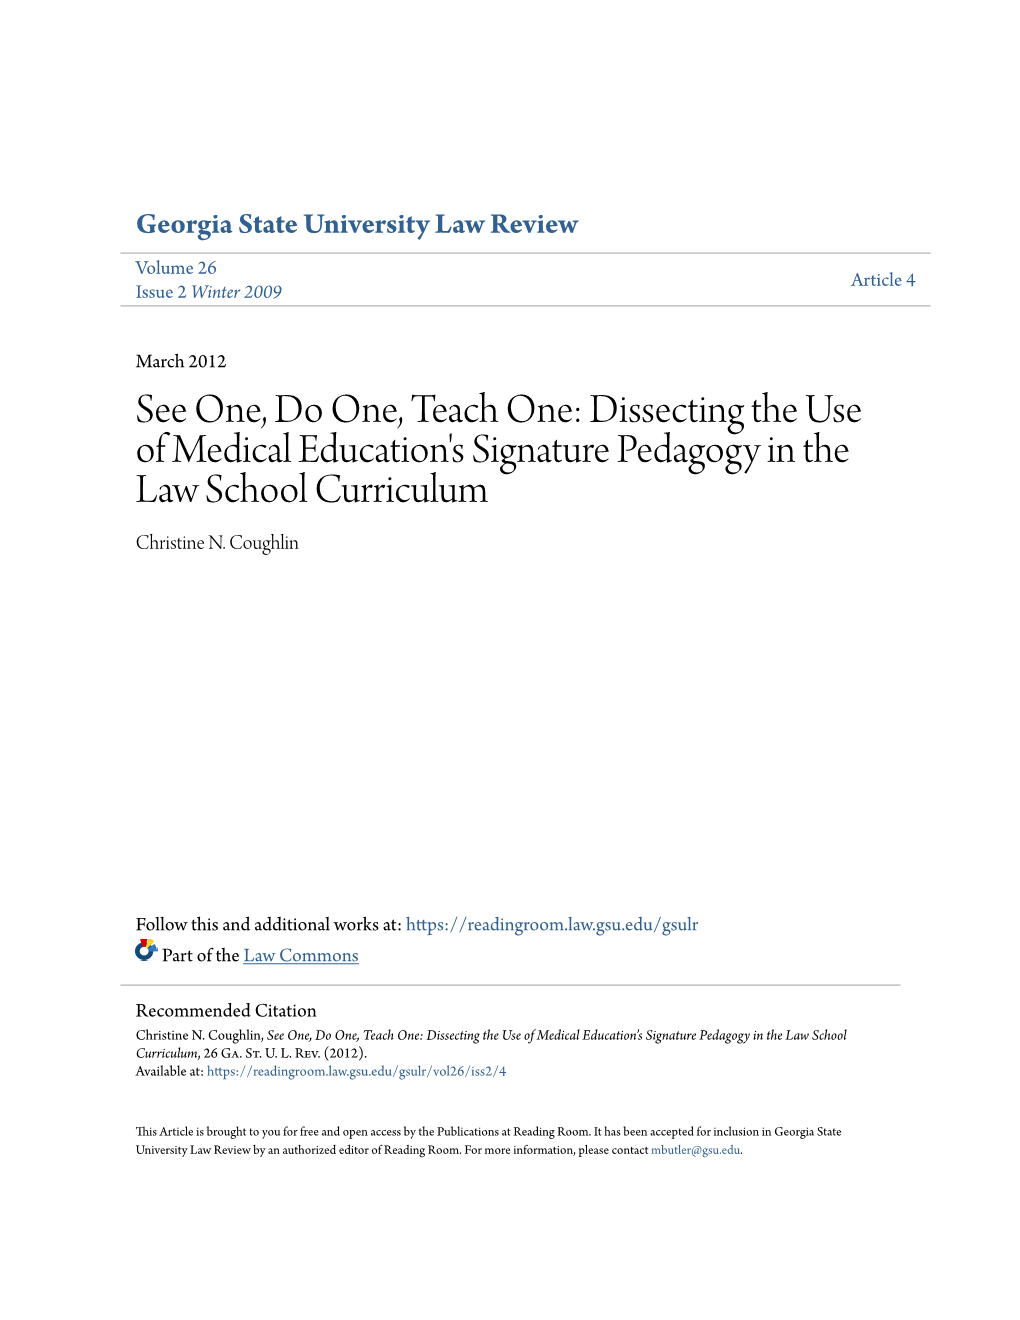 See One, Do One, Teach One: Dissecting the Use of Medical Education's Signature Pedagogy in the Law School Curriculum Christine N